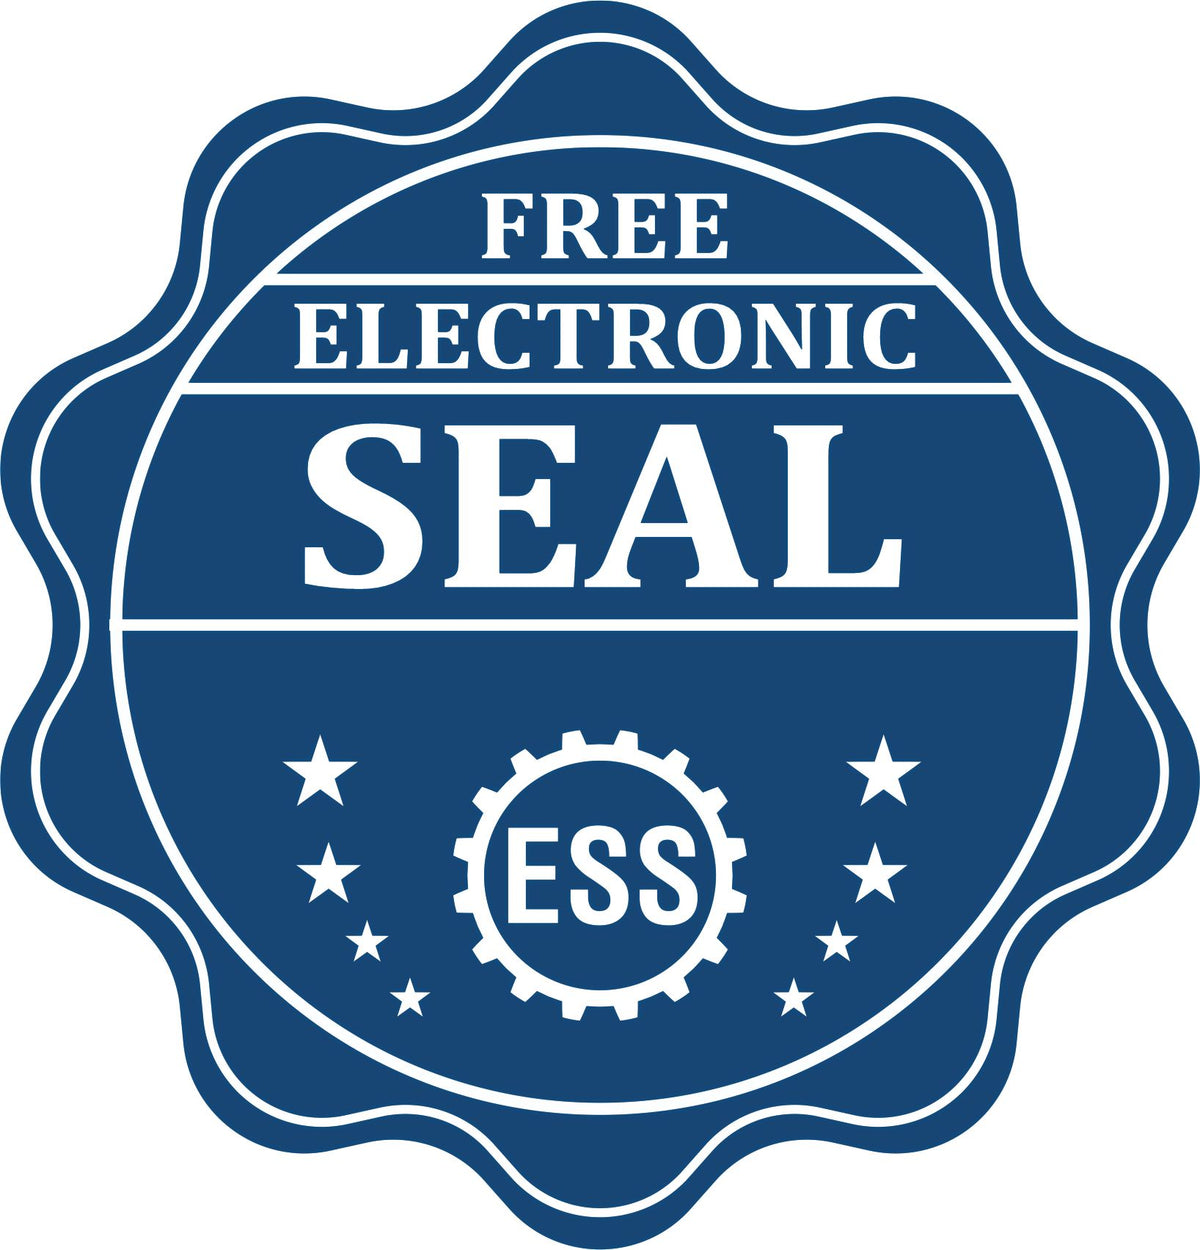 A badge showing a free electronic seal for the Slim Pre-Inked Ohio Landscape Architect Seal Stamp with stars and the ESS gear on the emblem.